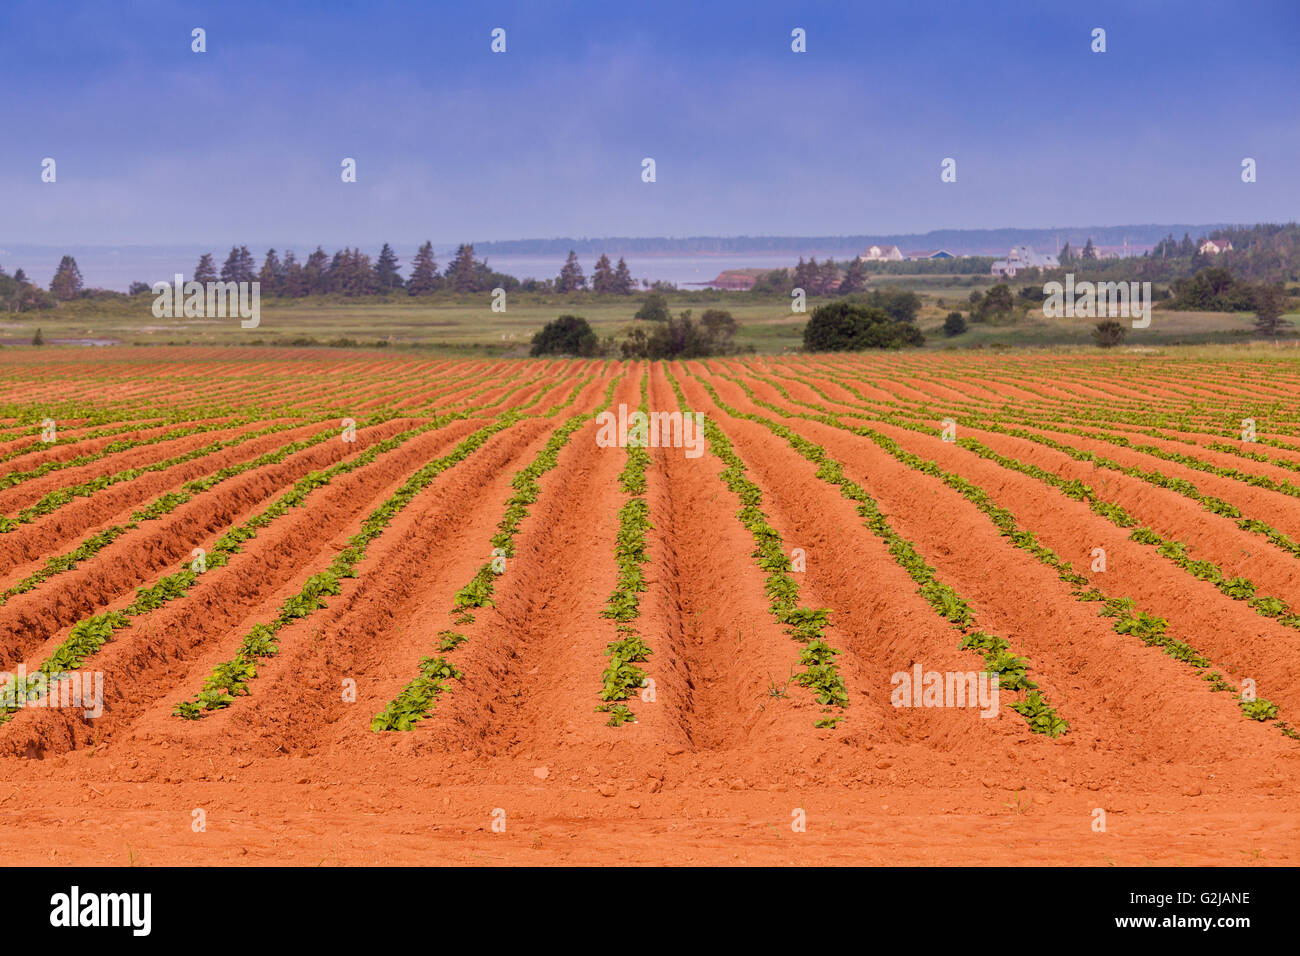 Red soil and potato field on Prince Edward Island, Canada Stock Photo